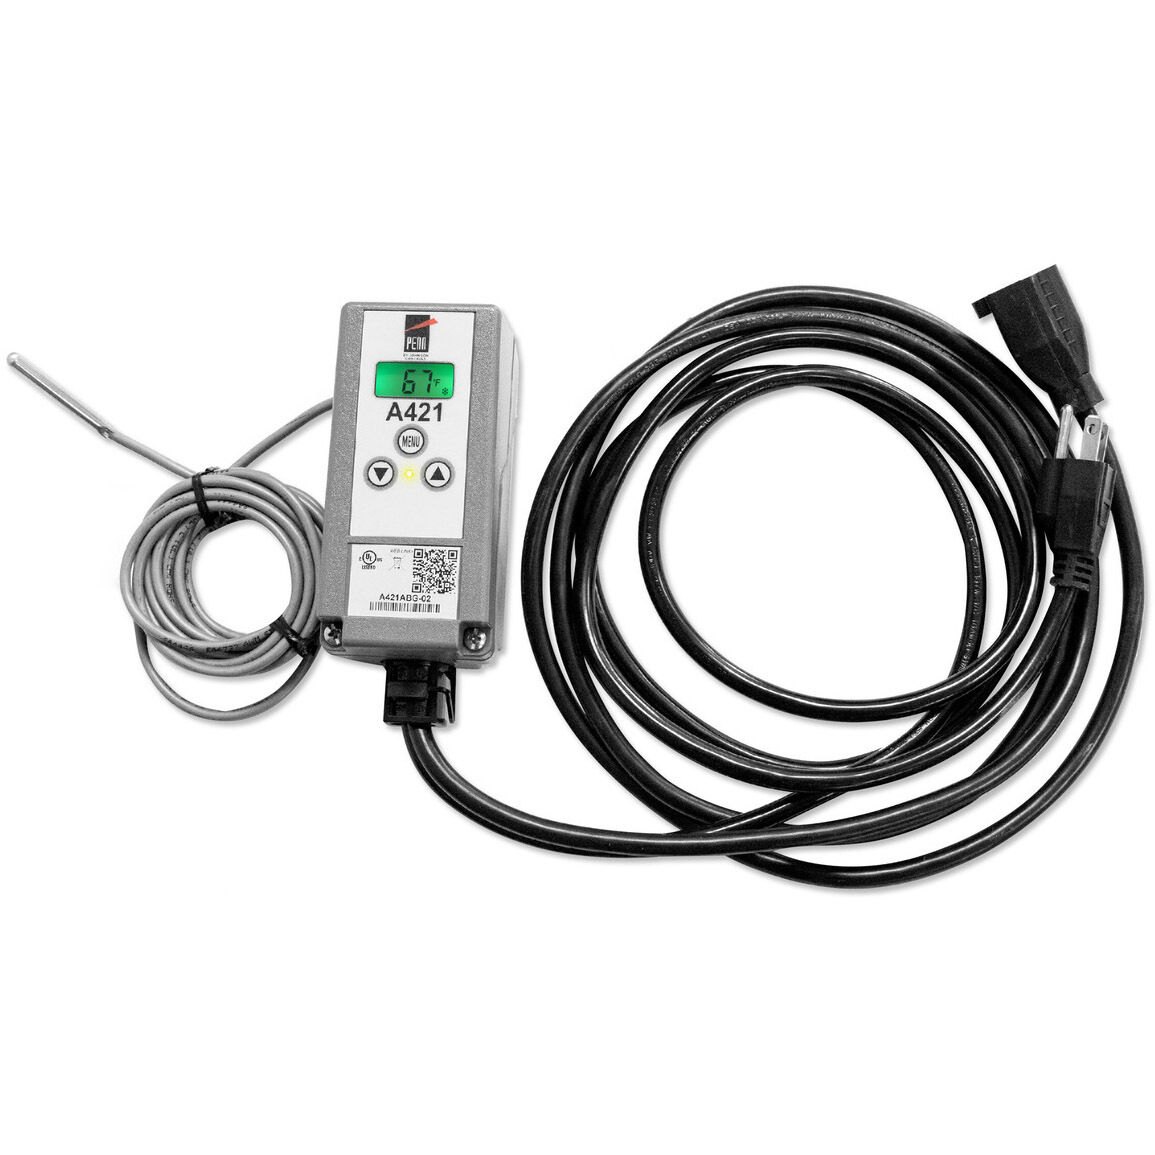 Johnson Controls Electronic Temperature Control with Dual Power Cords